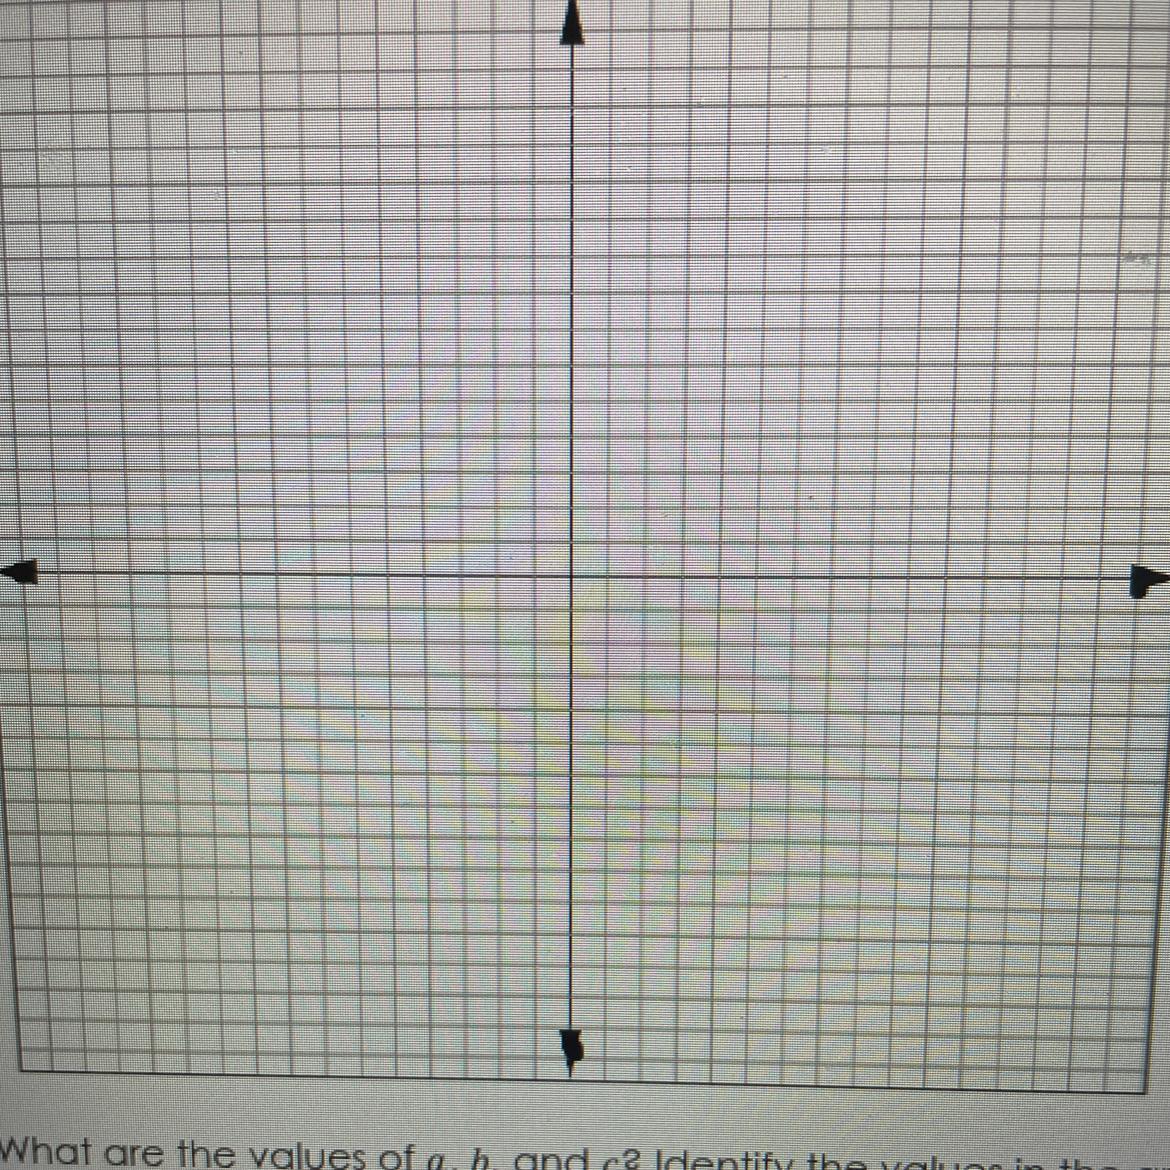 I Need Help Graphing The Right Points So Please Send A Picture Of The Graph AlsoIn The Xy-coordinate